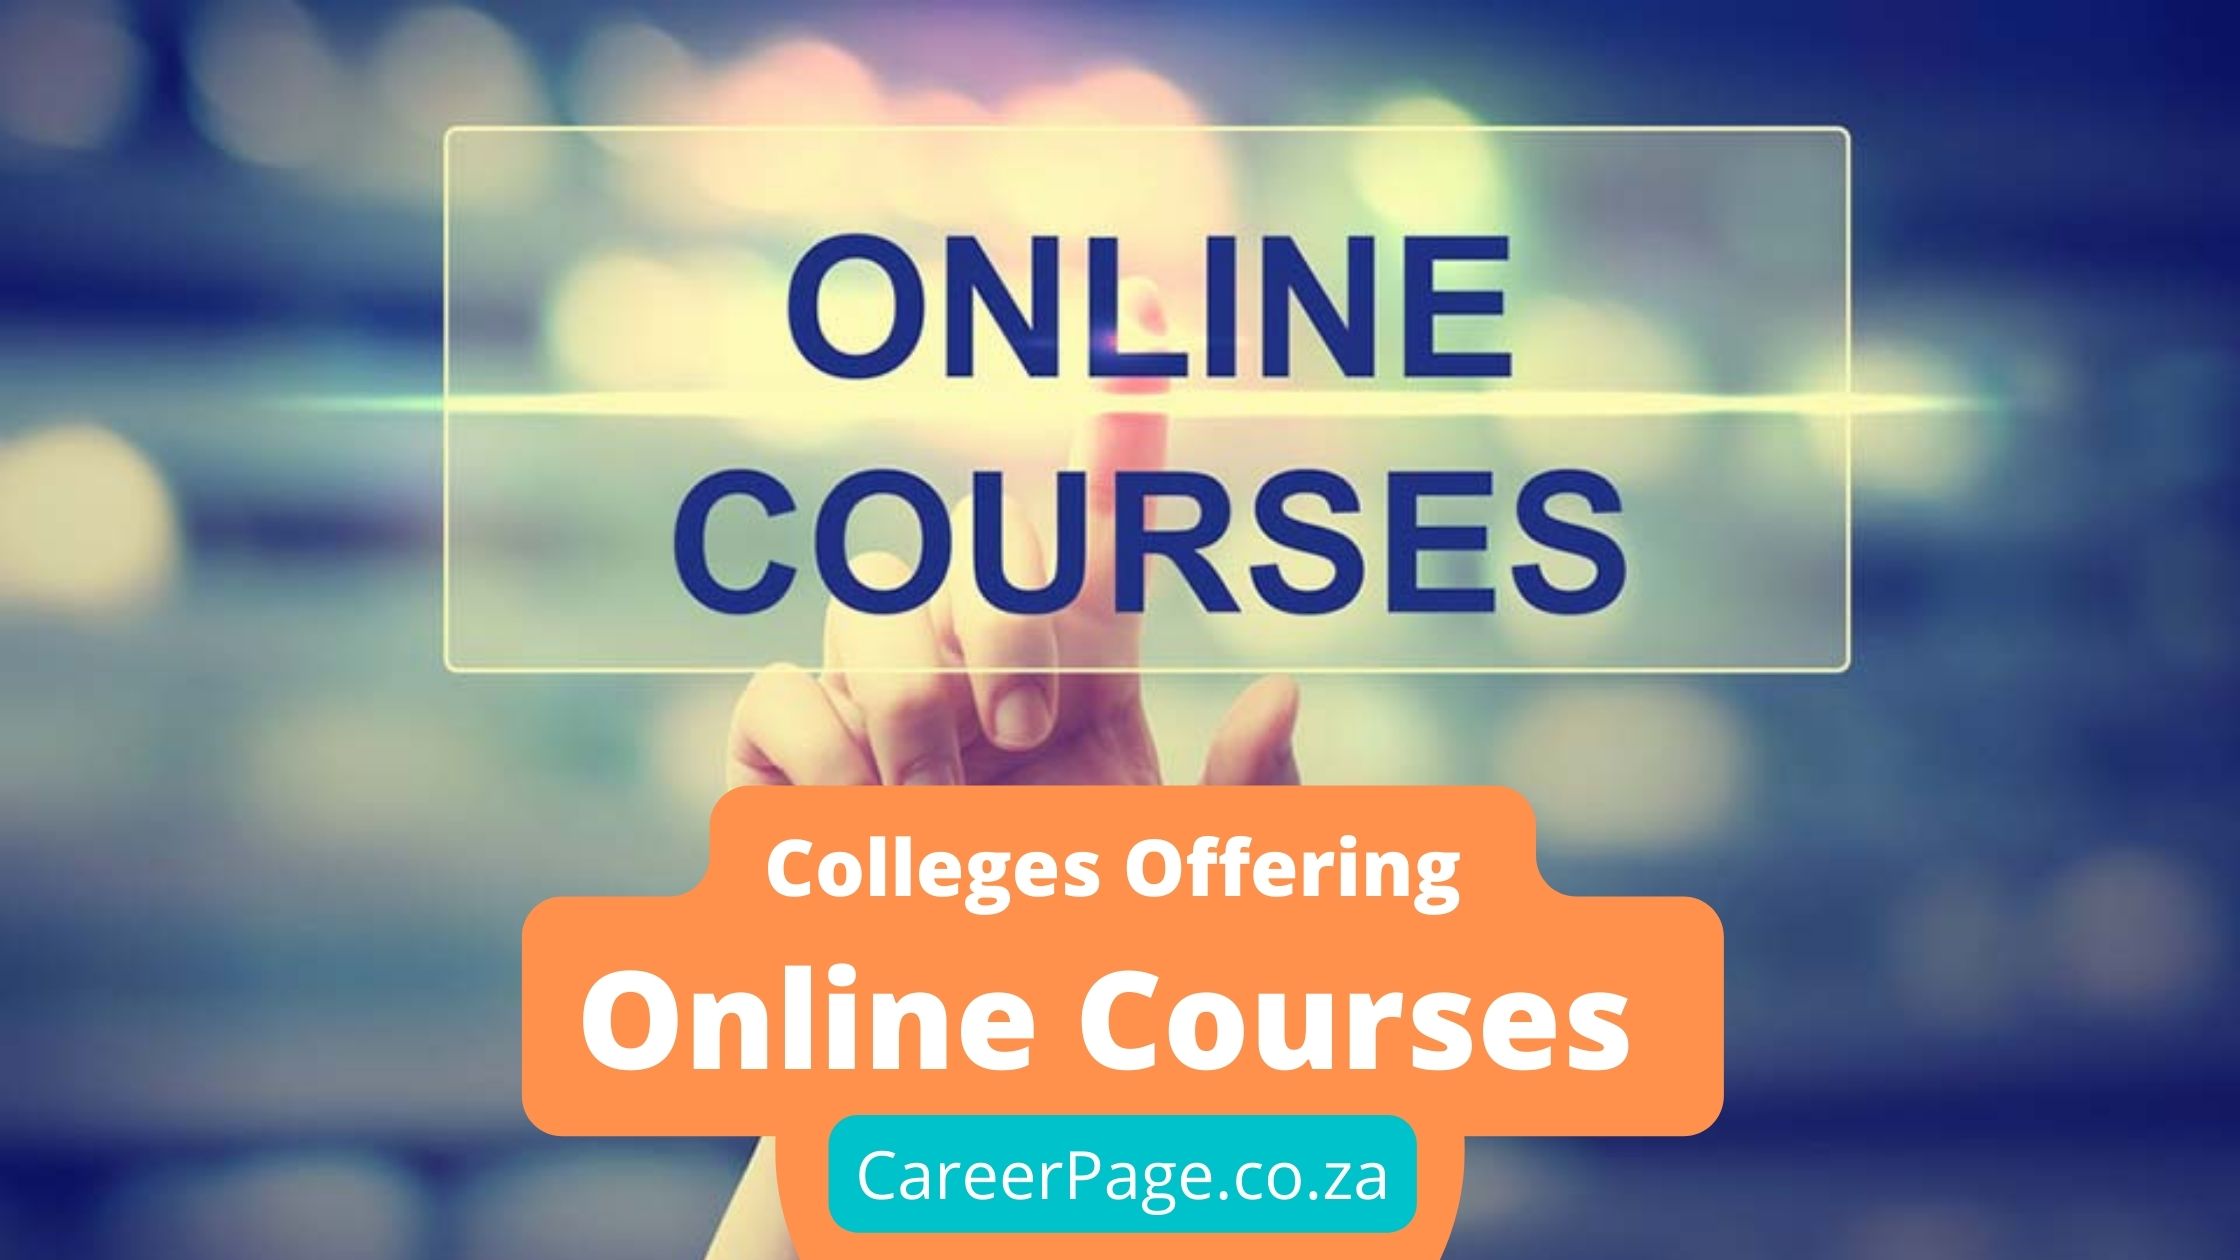 Colleges offering online courses in South Africa